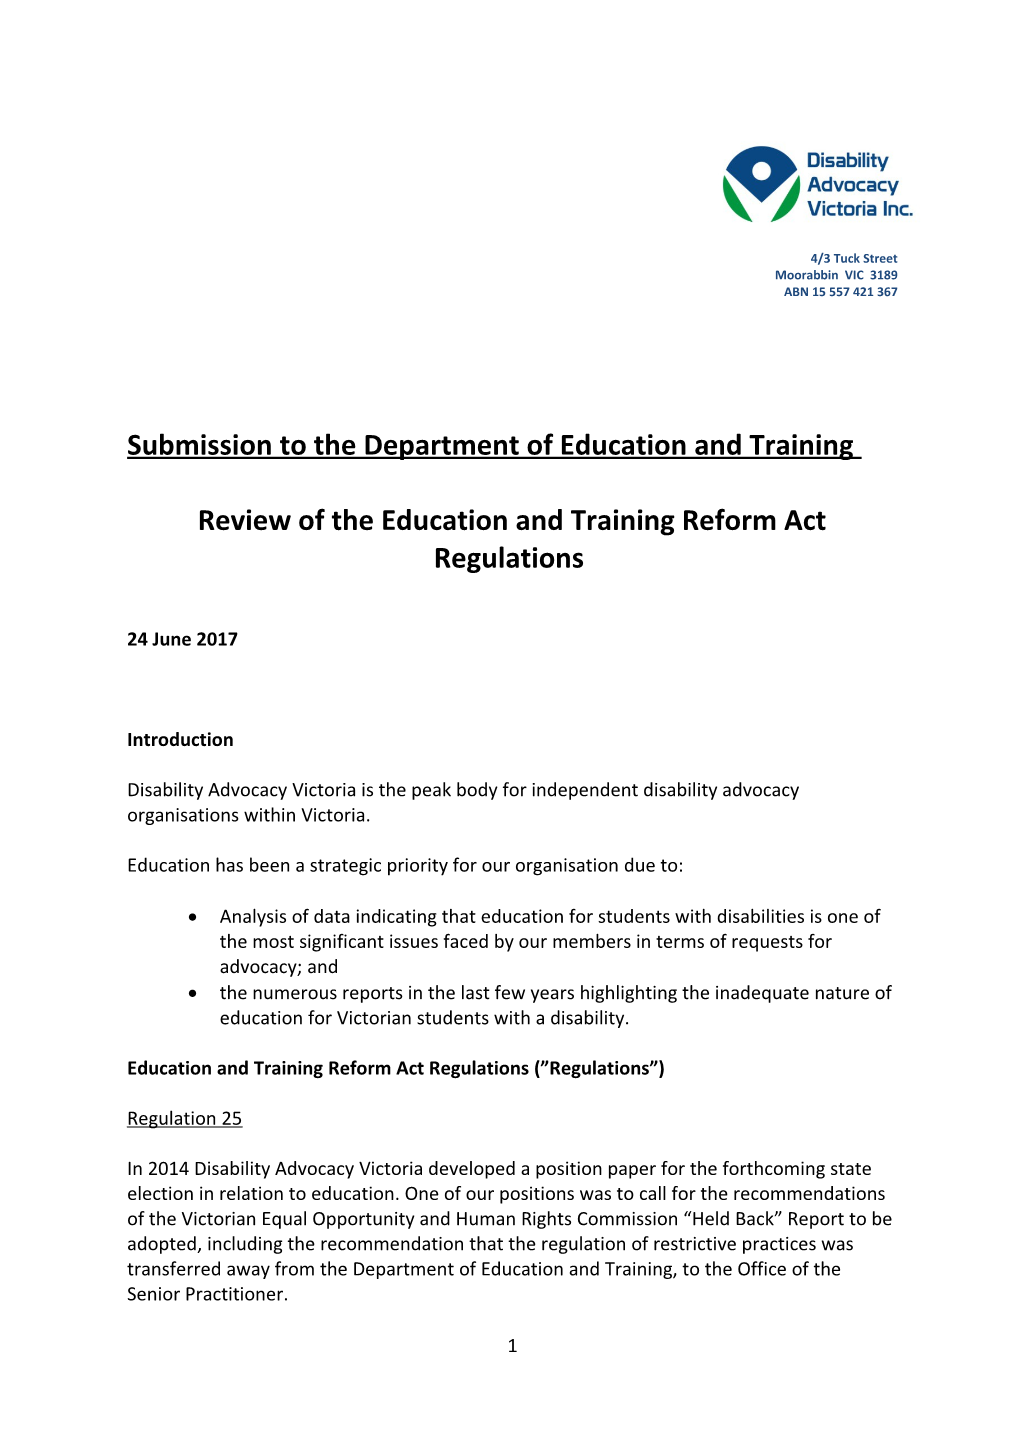 Submission to the Department of Education and Training